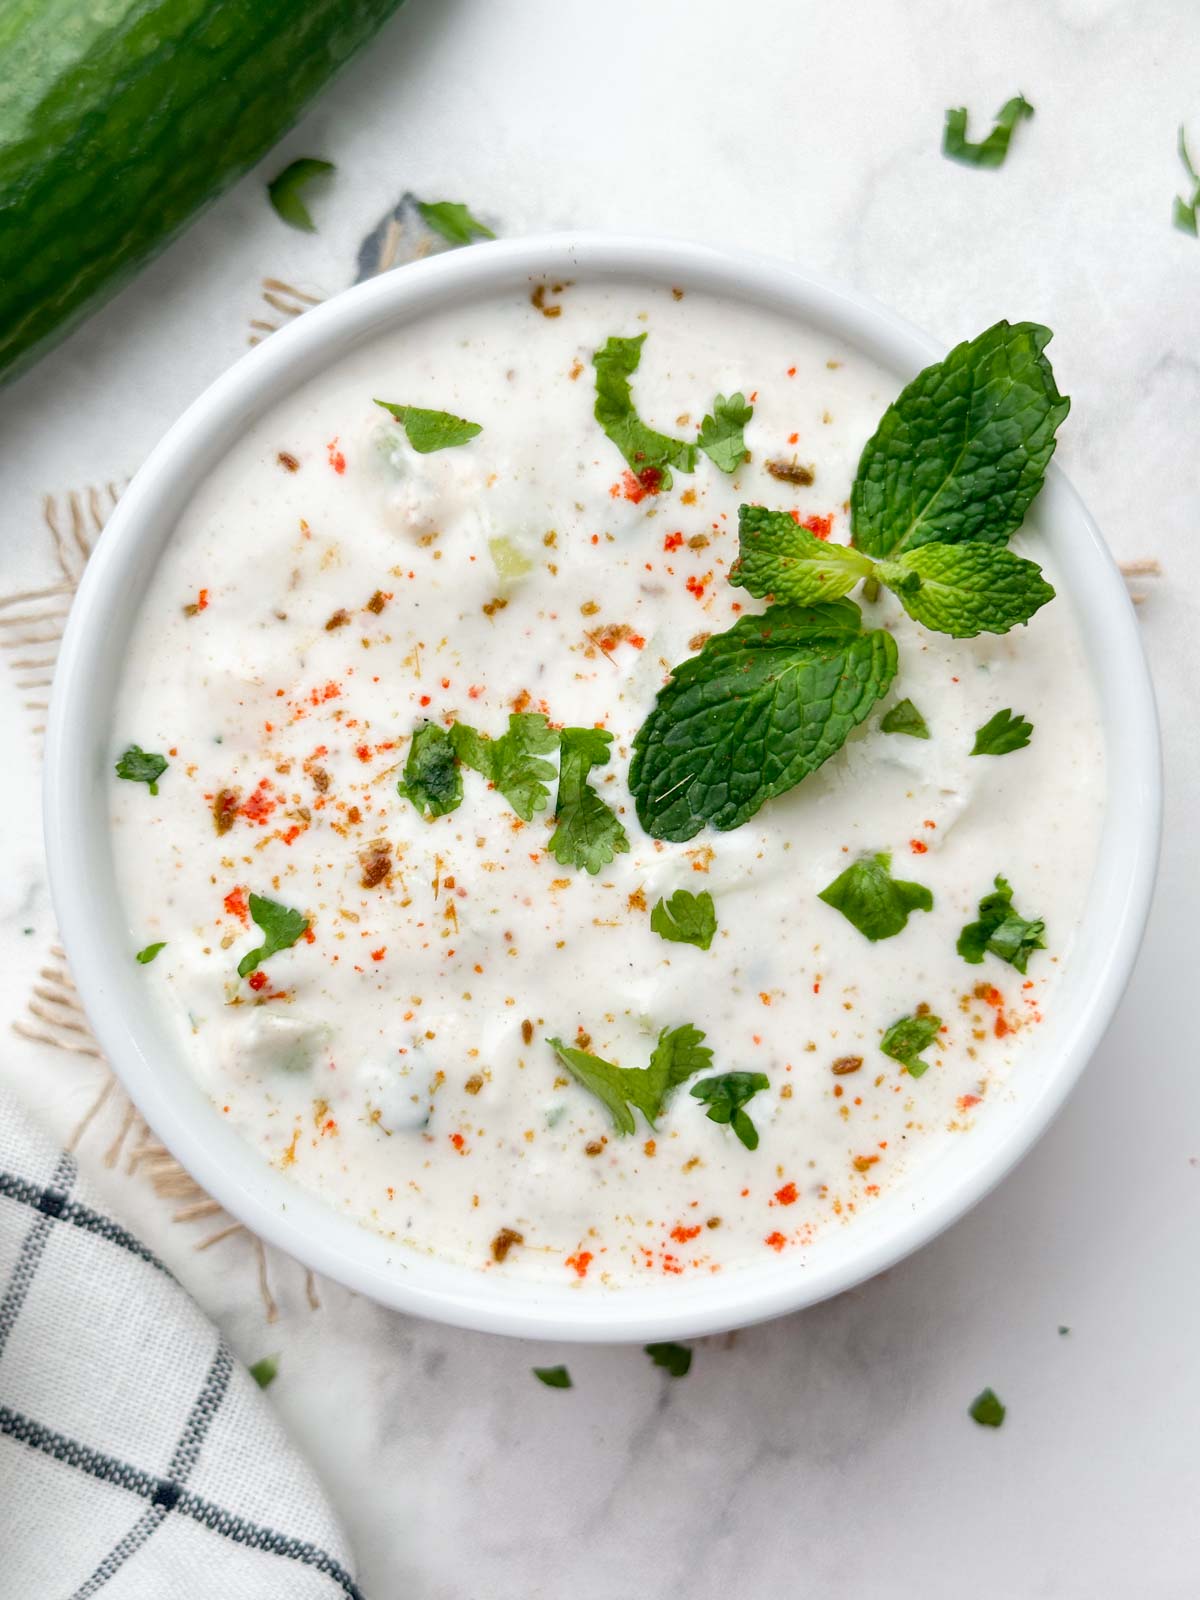 cucumber raita served in a bowl garnished with coriander and mint leaves